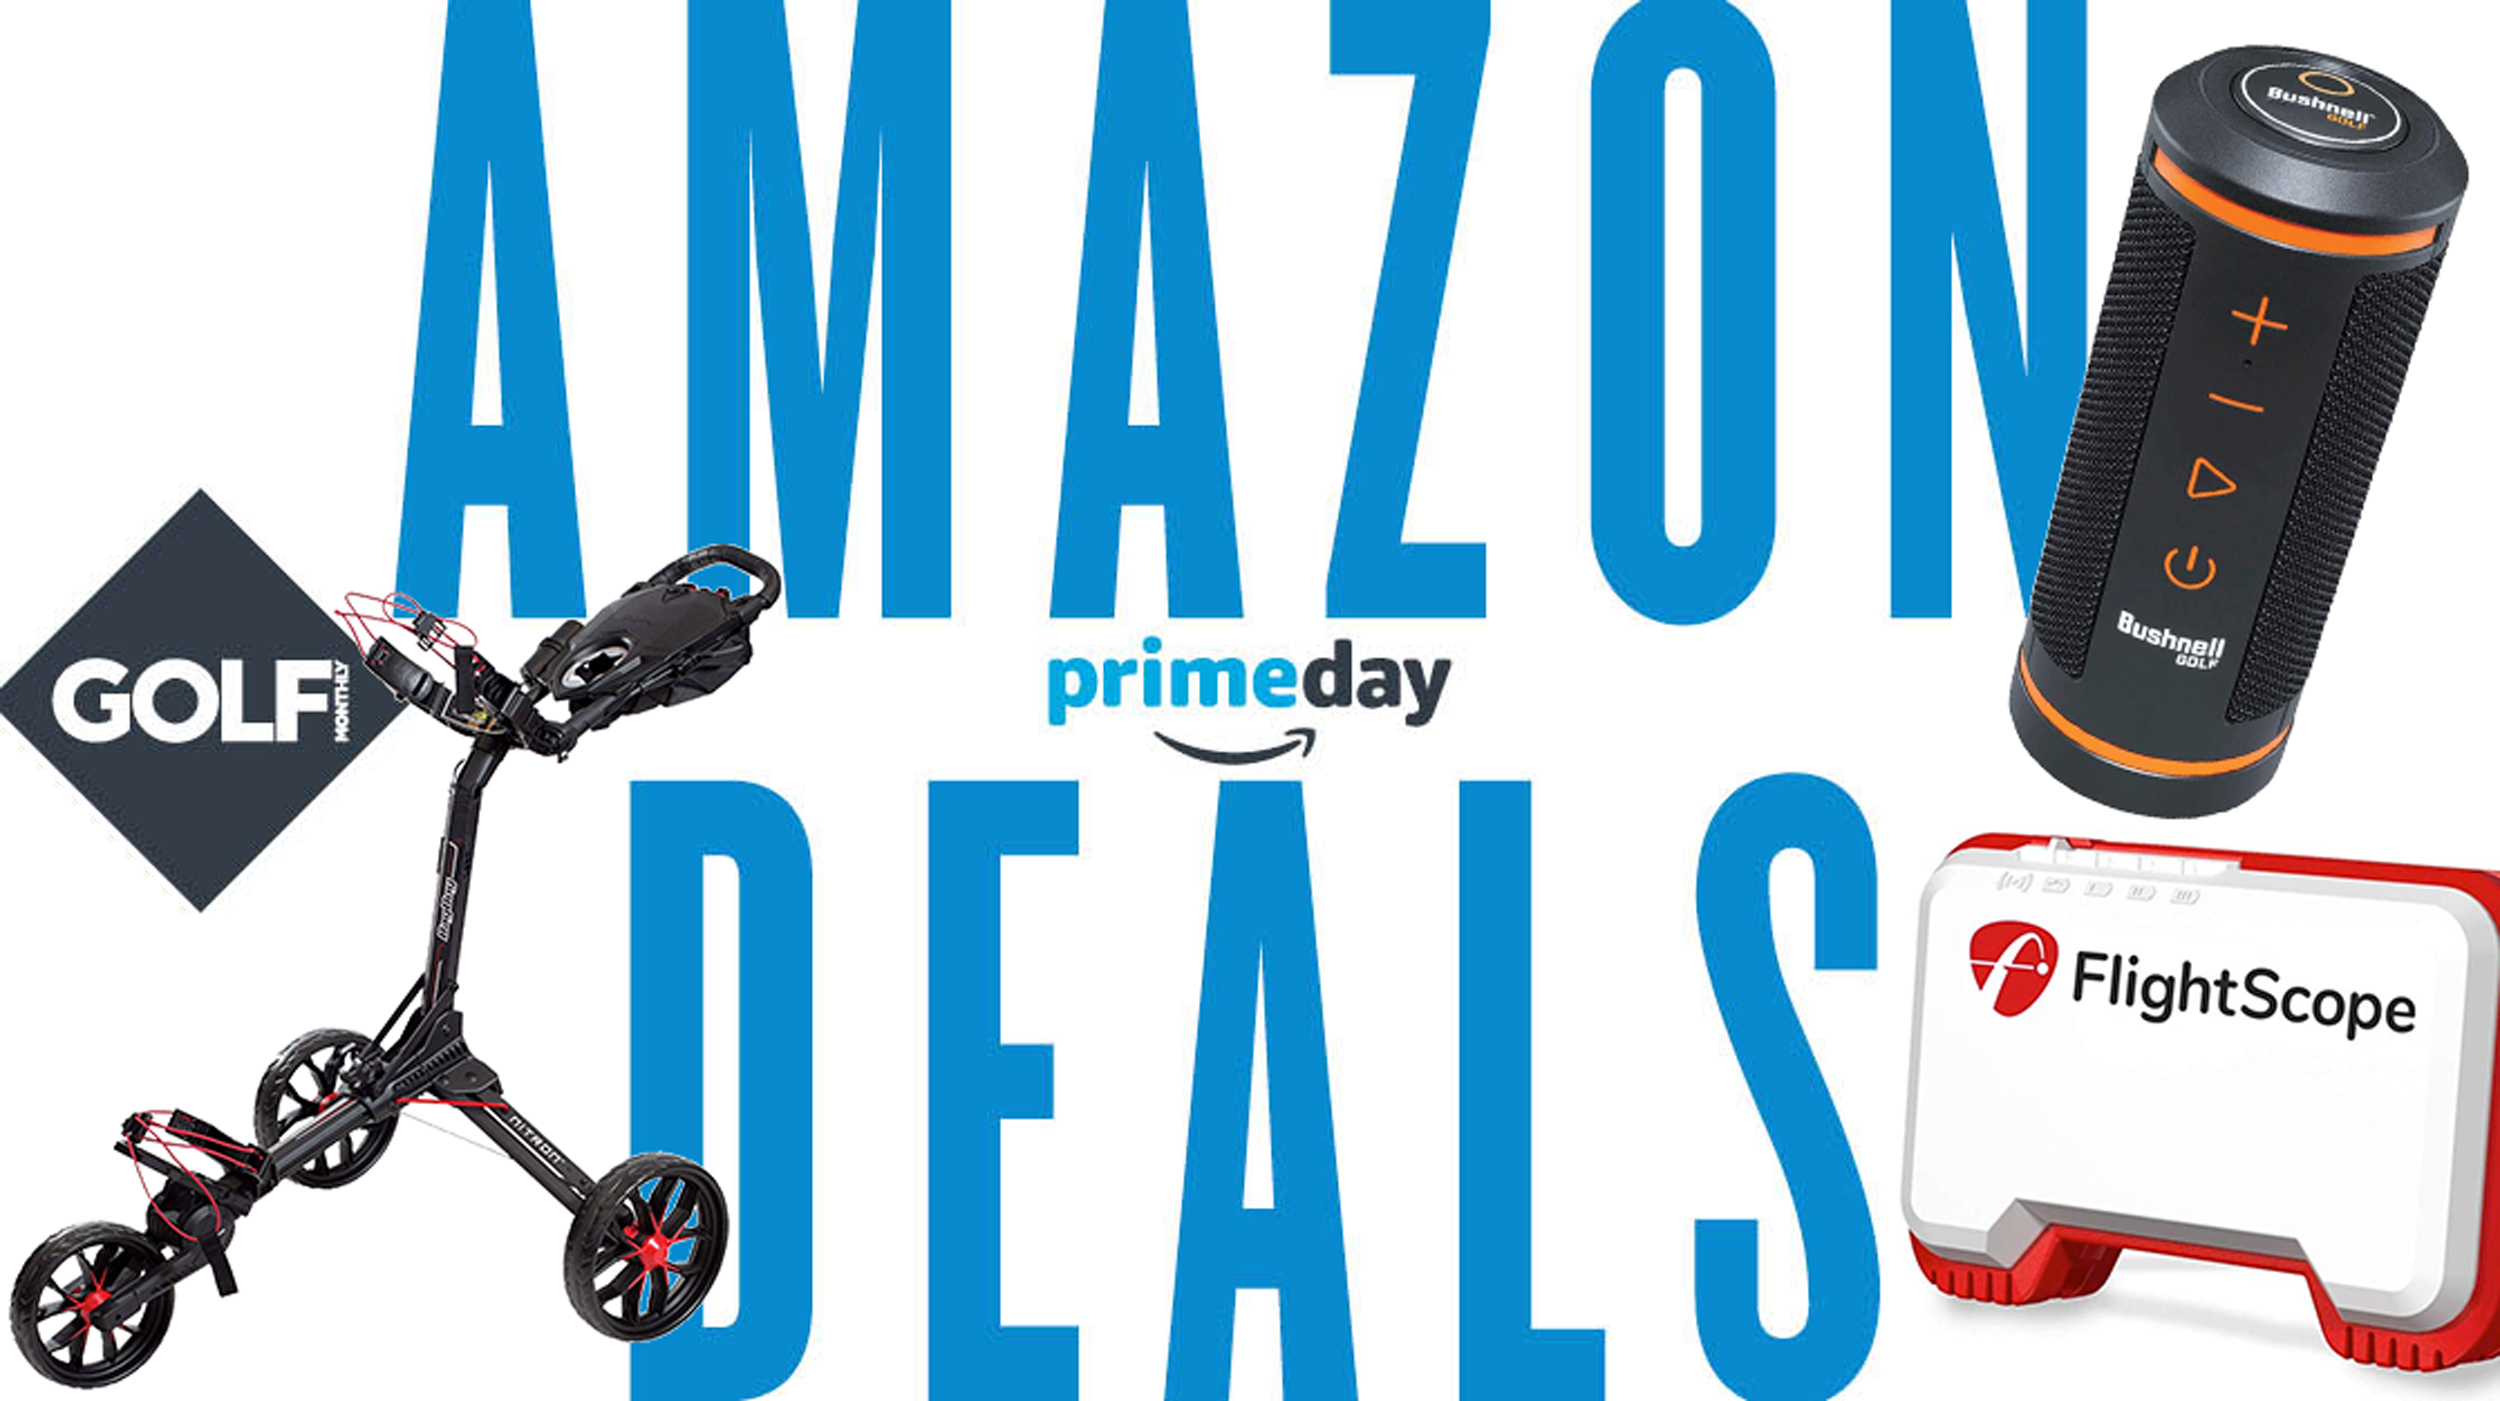 Prime Day golf deals: Everything you need to know about